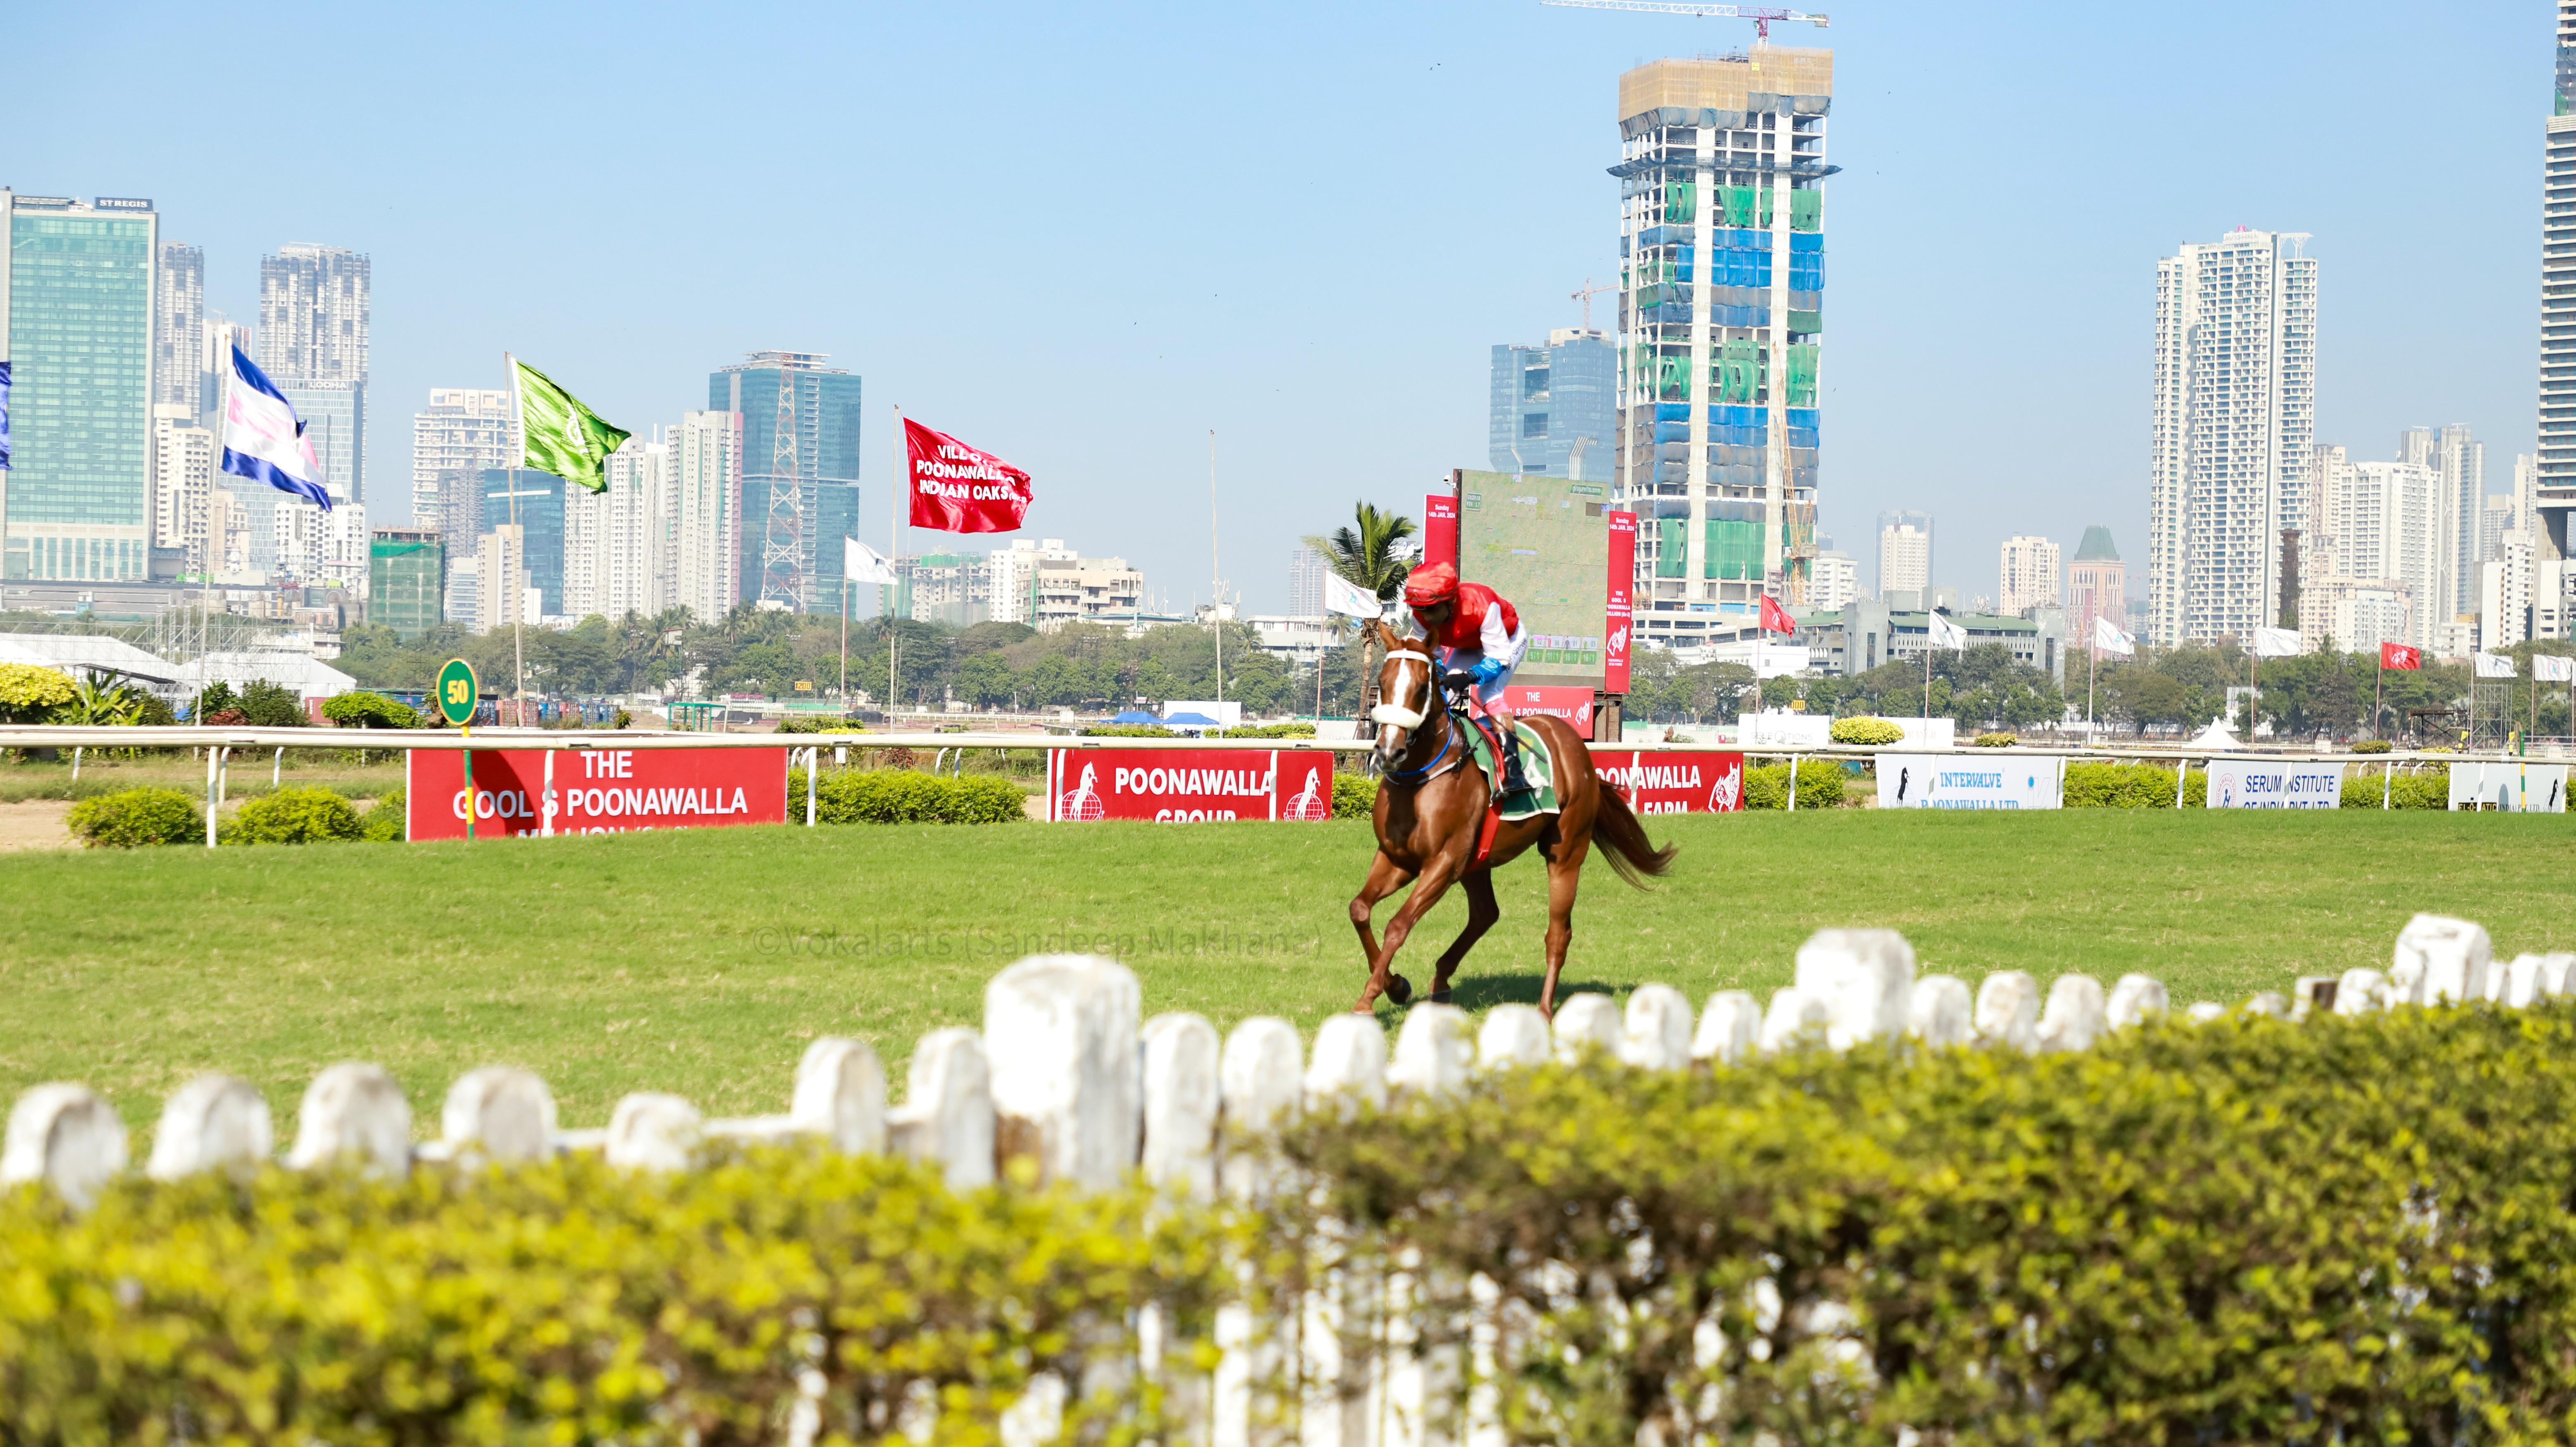 Mumbai’s horse racing season commences in November and goes on till April featuring India’s top five classic races: the Indian Derby, the 1000 Guineas Race, the 2000 Guineas Race, the Oaks Race and the St Leger Race